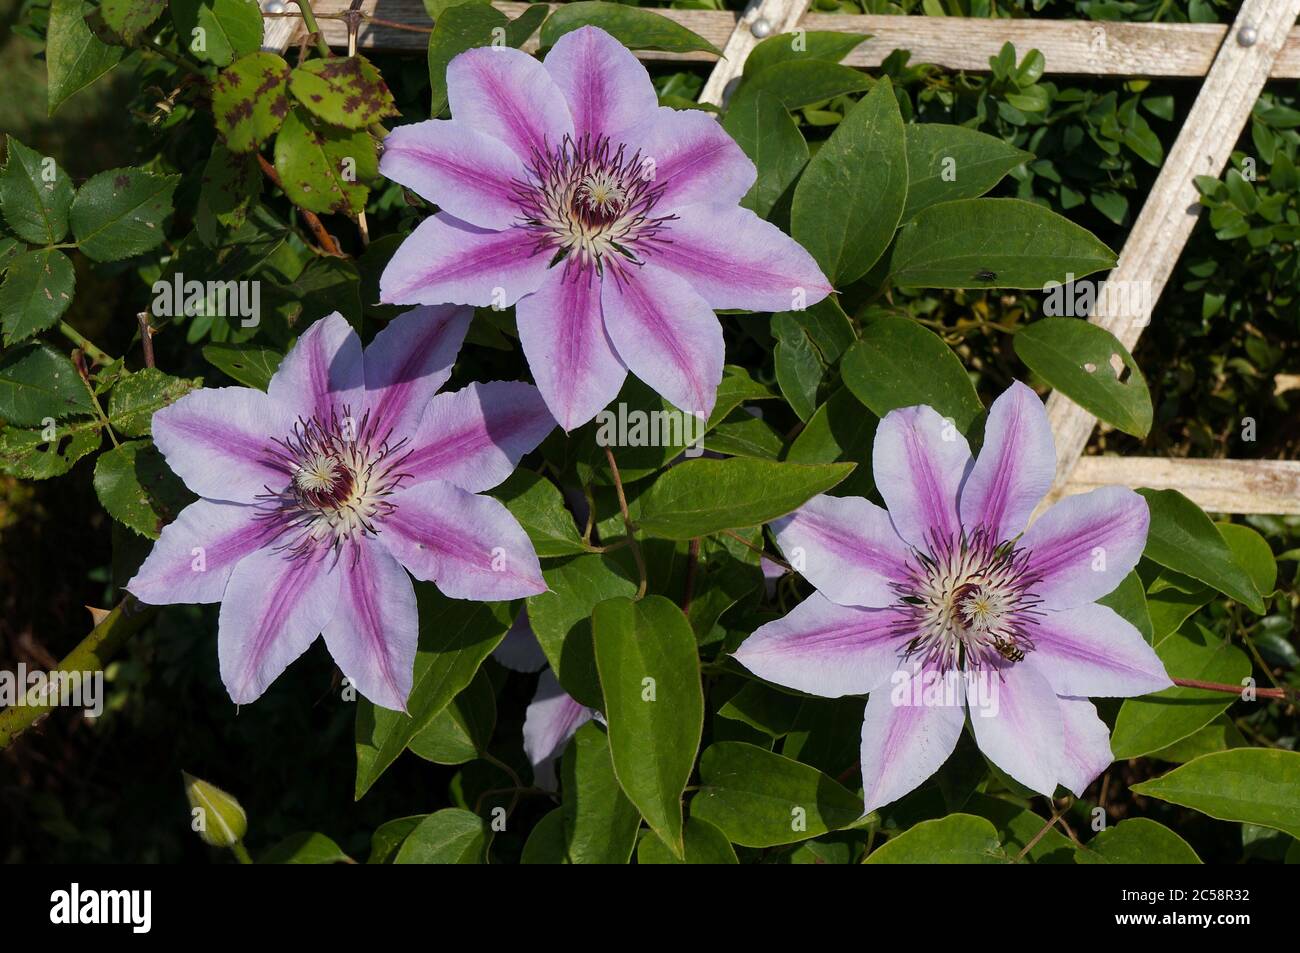 clematis plant in the buttercup family, Ranunculaceae.with blooming pink mauve flowers Stock Photo